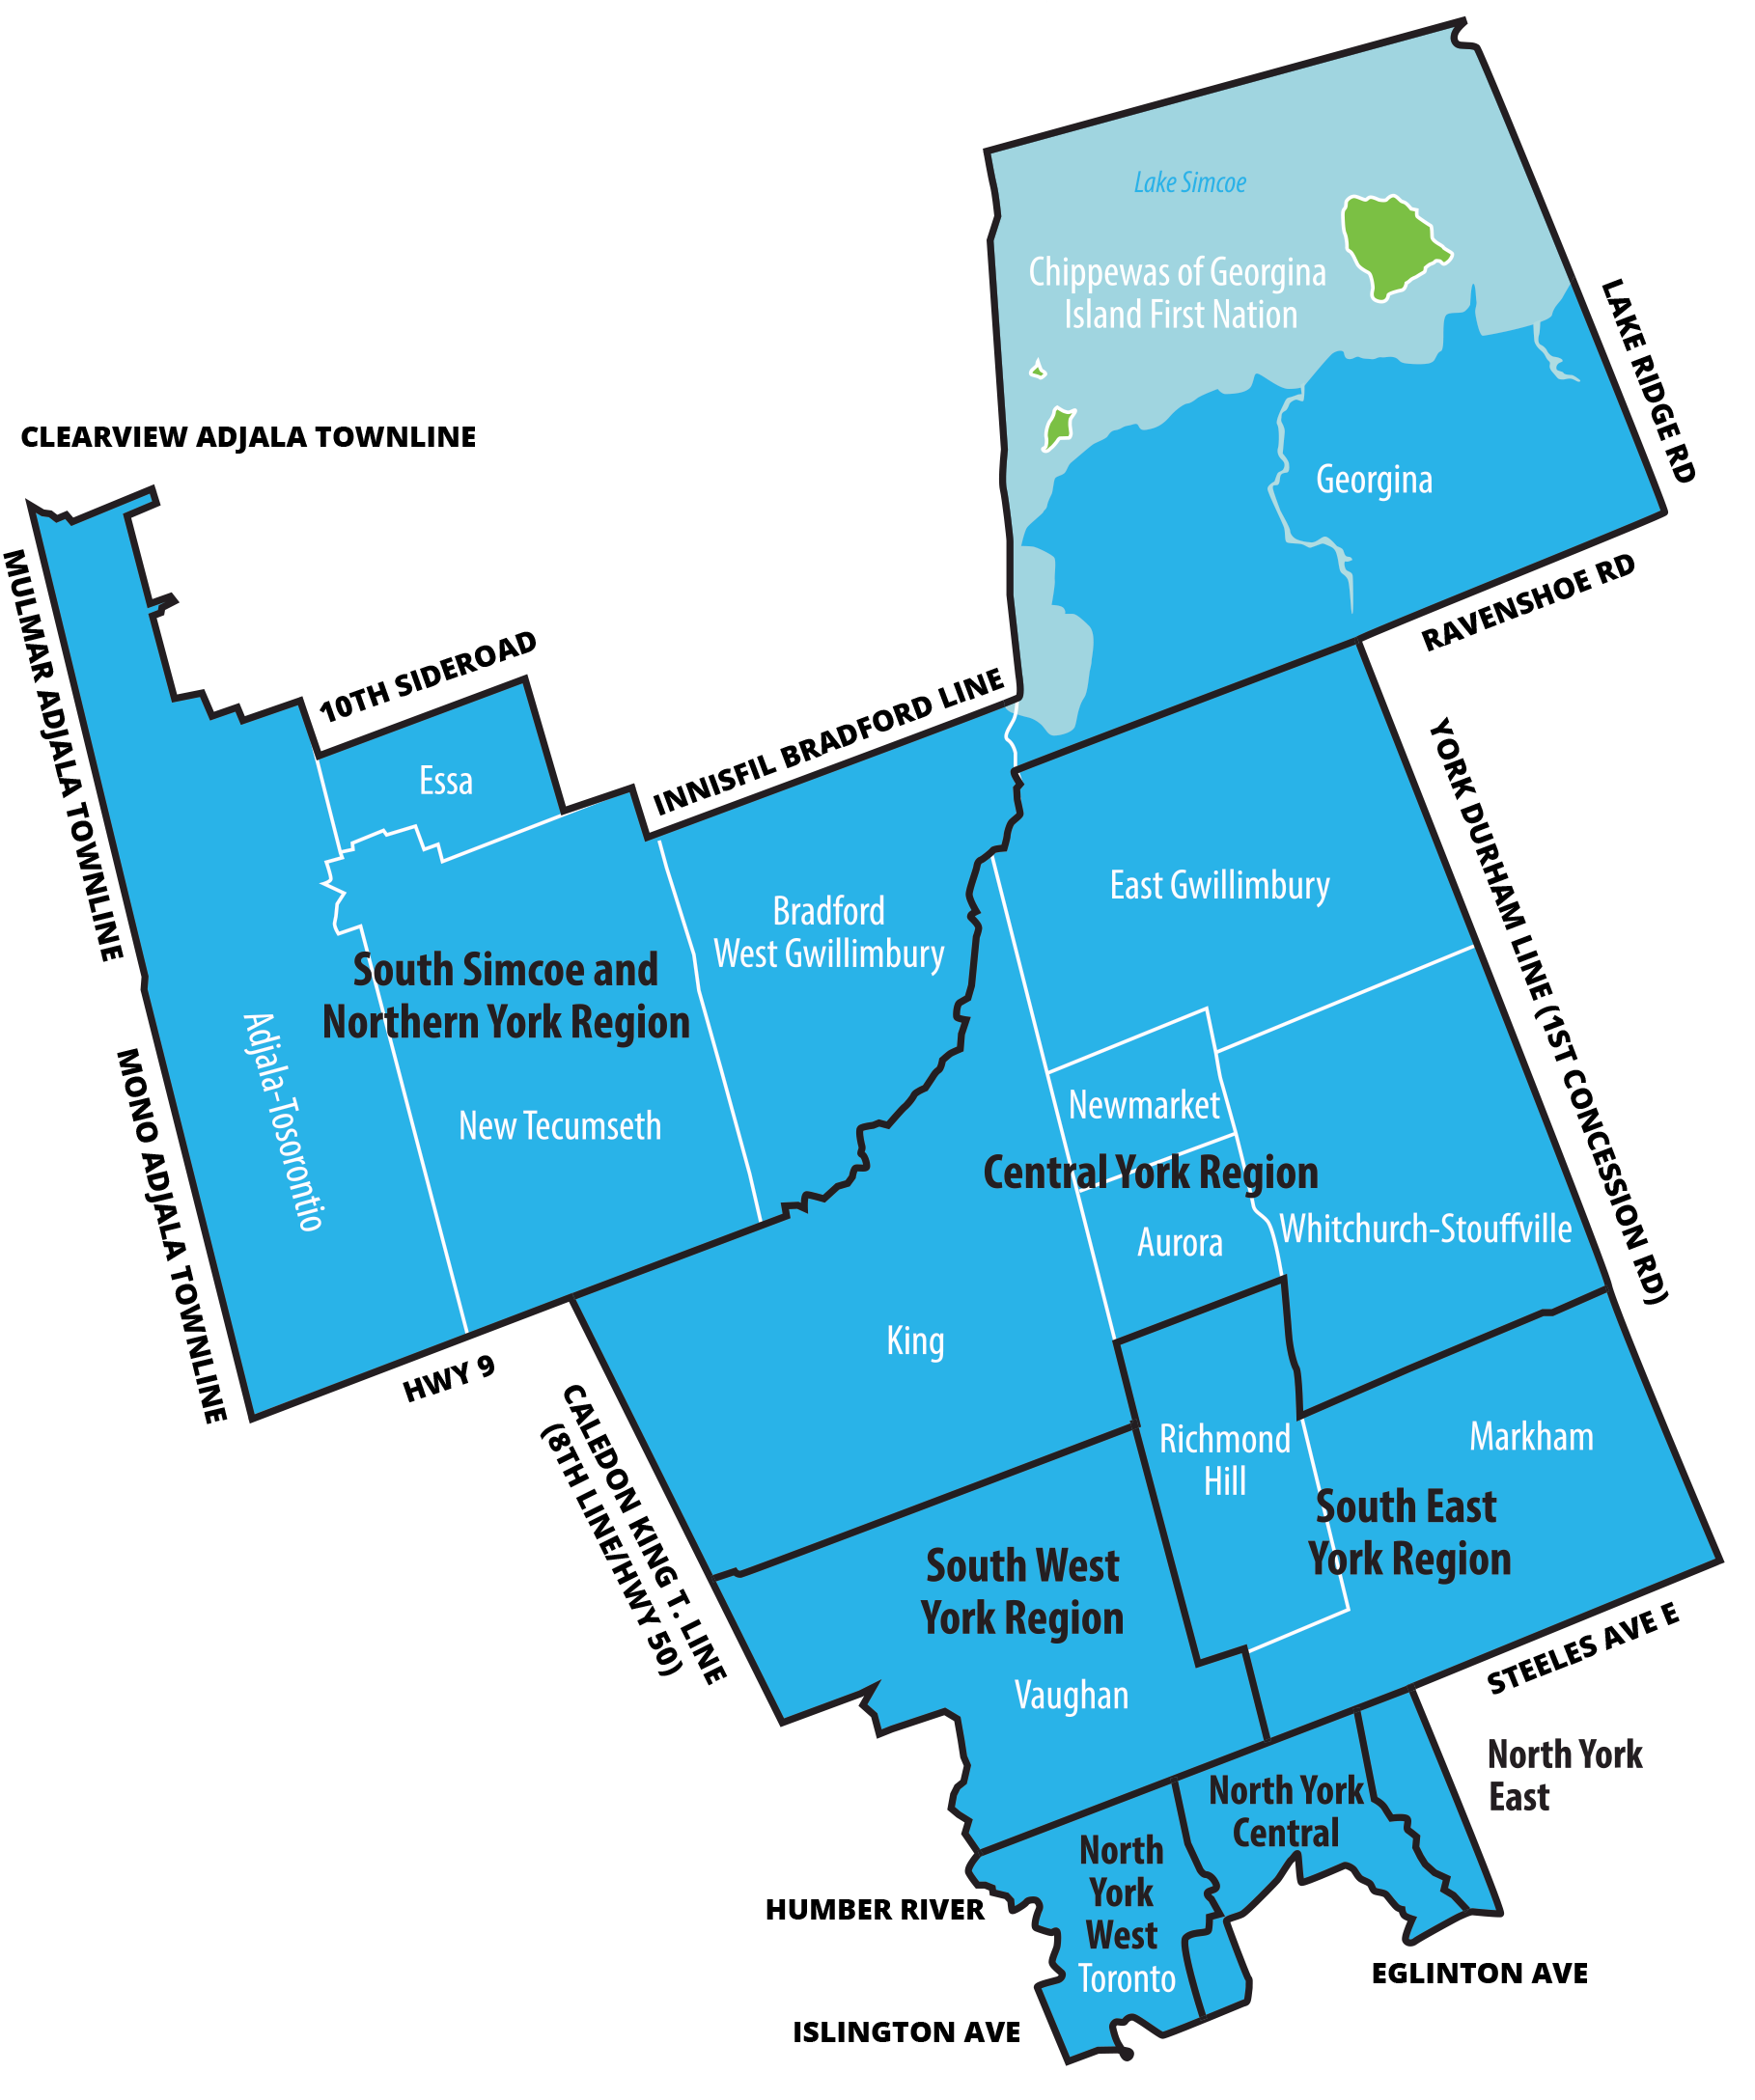 boundaries of the iRIDE service area, going from Innisfil down to Lake Ontario.